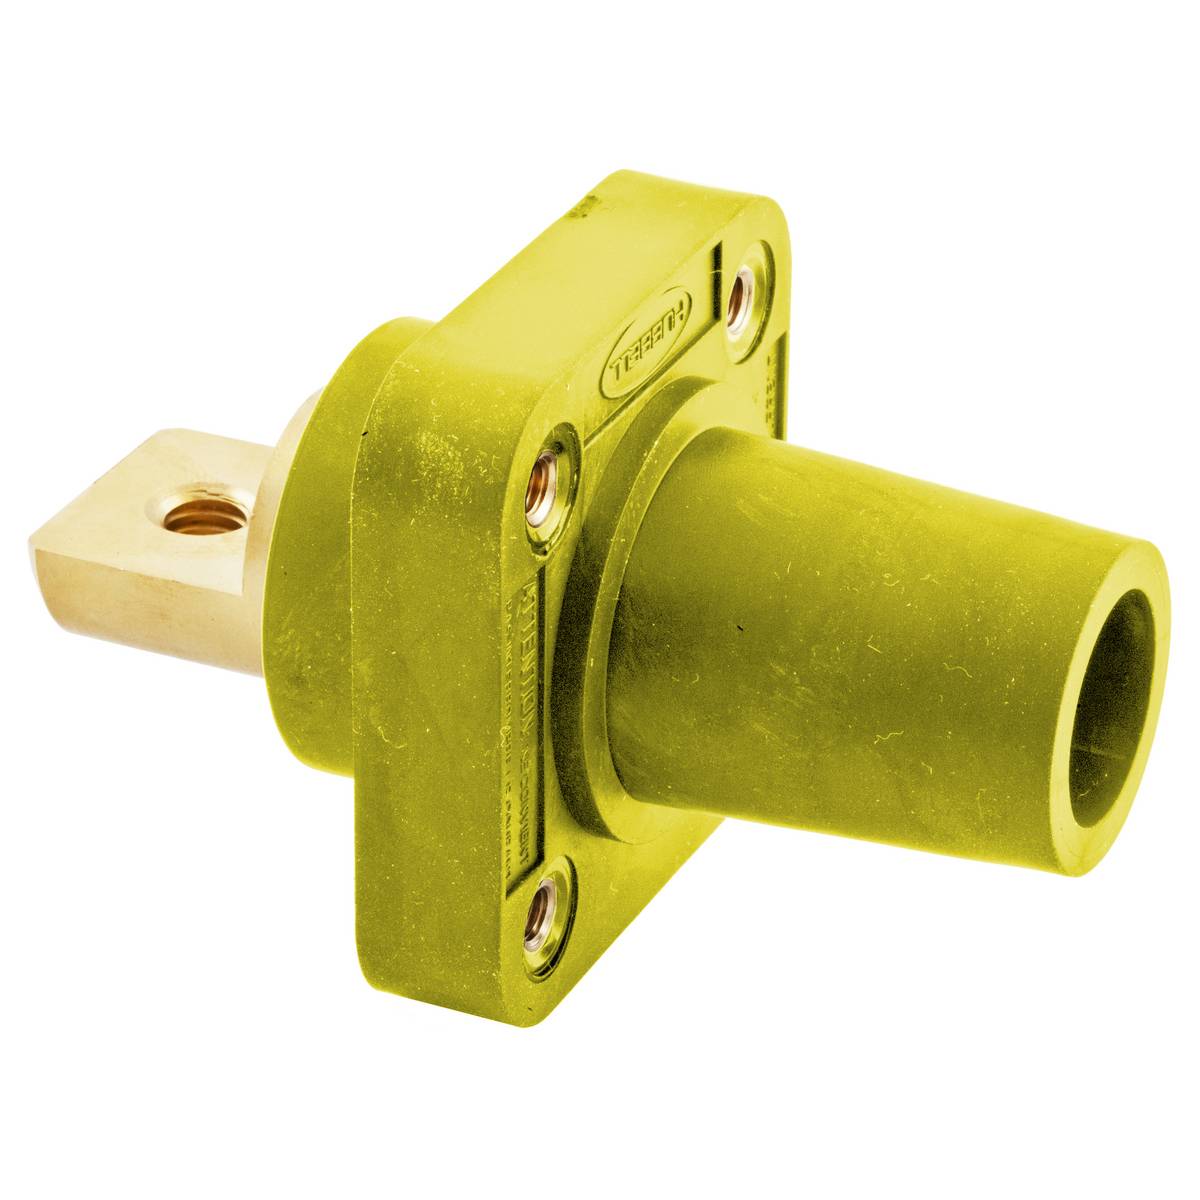 Wiring Device-Kellems HBLFRBY 16 Series 1-Pole Female Heavy Duty Industrial Grade Standard Straight Single Pole Receptacle With 300/400 A Plug, 600 VAC/250 VDC, 400 A, 4 to 4/0 AWG Wire, Screw Terminal Connection